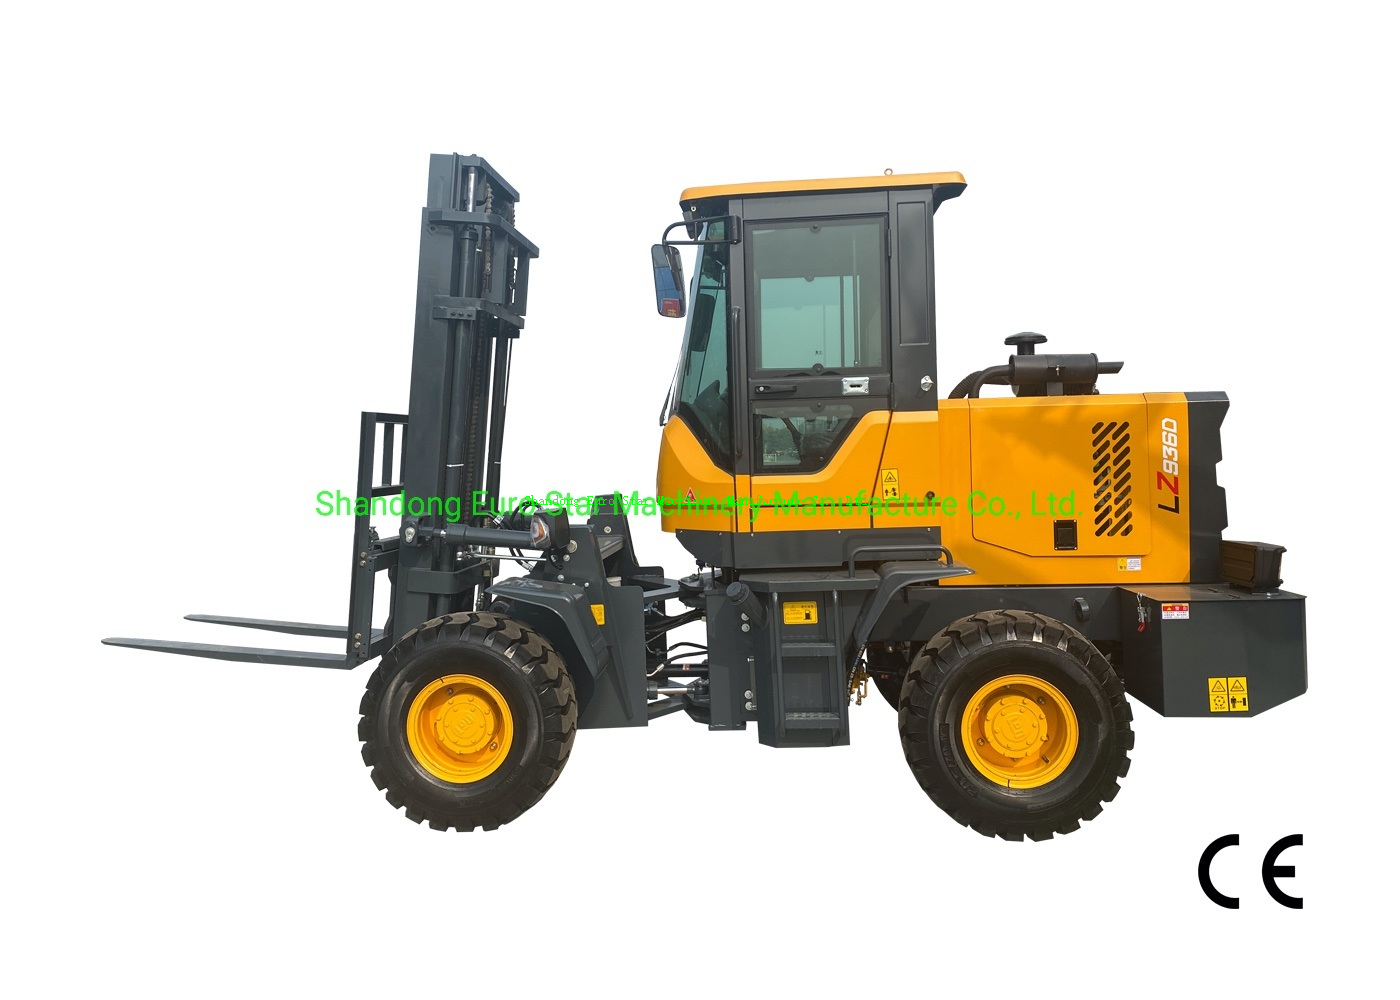 1-6t-Ez936-Wheel-Loader-Multi-Functional-Mini-Small-CE-Approved-China-Farm-Construction-Medium-Bucket-Machinery-Compact-Backhoe-Excavator-Front-End-Loader (4).jpg